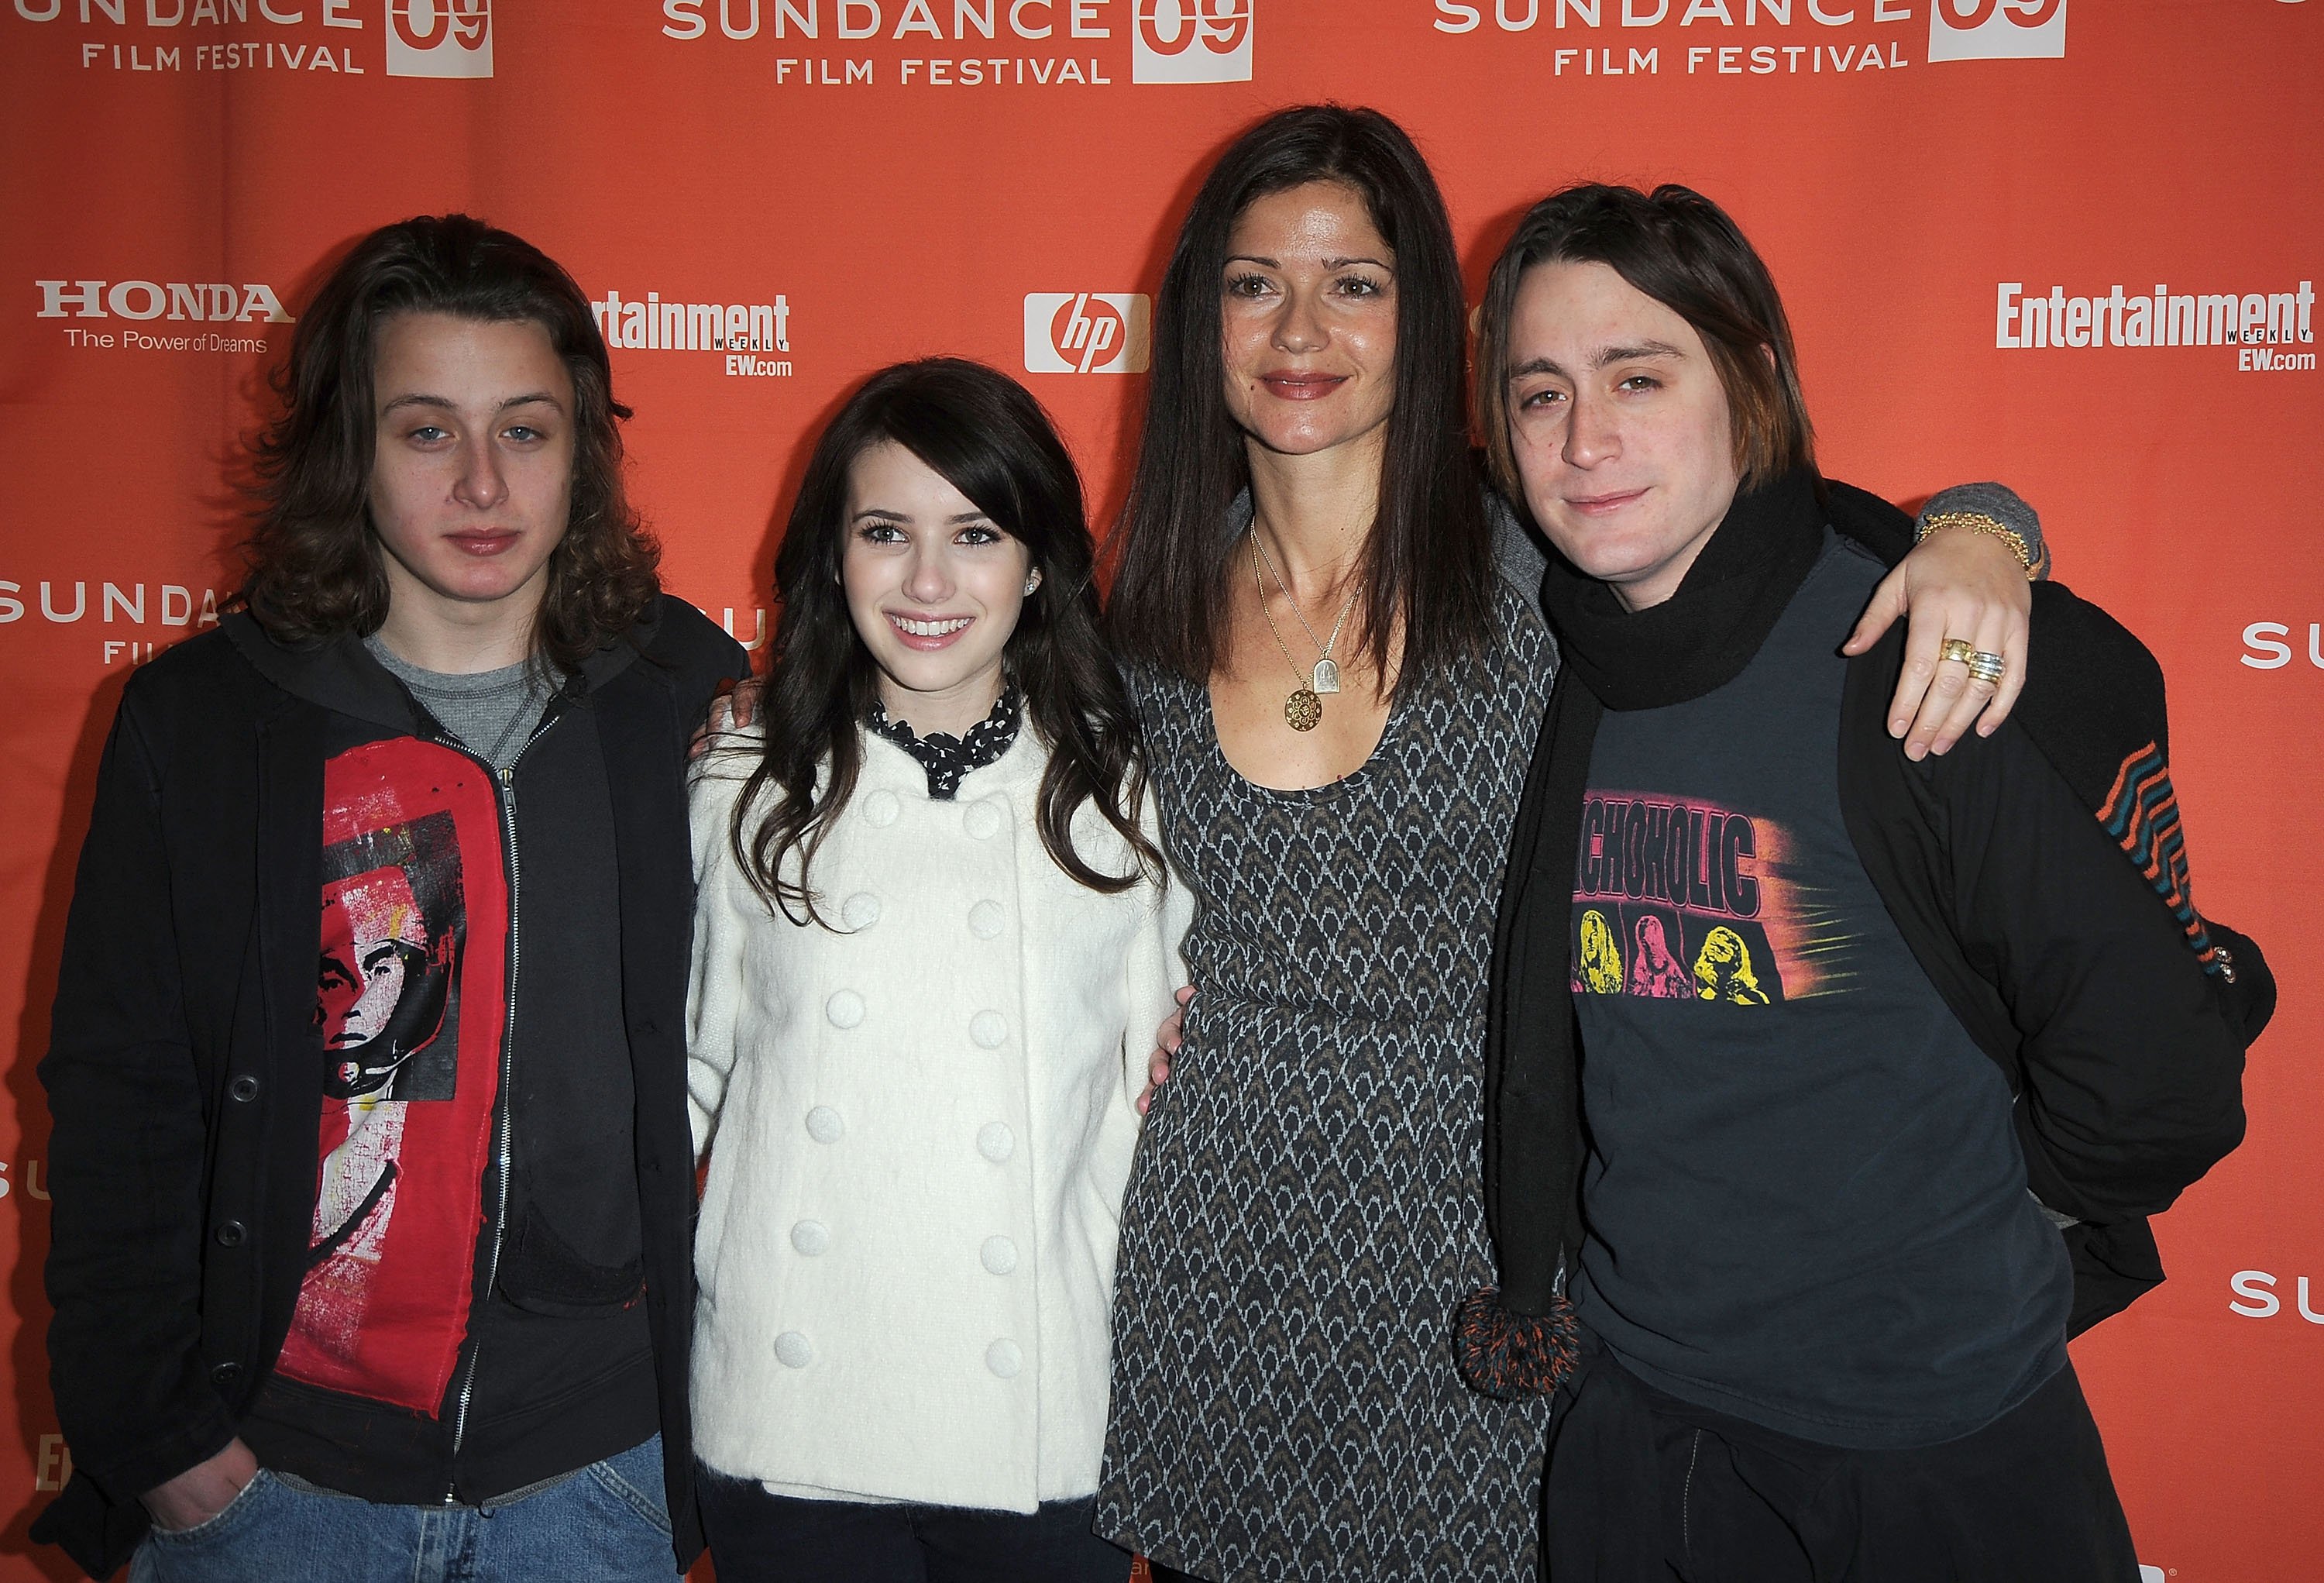 Rory Culkin, Emma Roberts, Jil Hennessey and Kieran Culkin attend the premiere of "Lymelife" during the 2009 Sundance Film Festival on January 17, 2009 in Park City, Utah. | Source: Getty Images